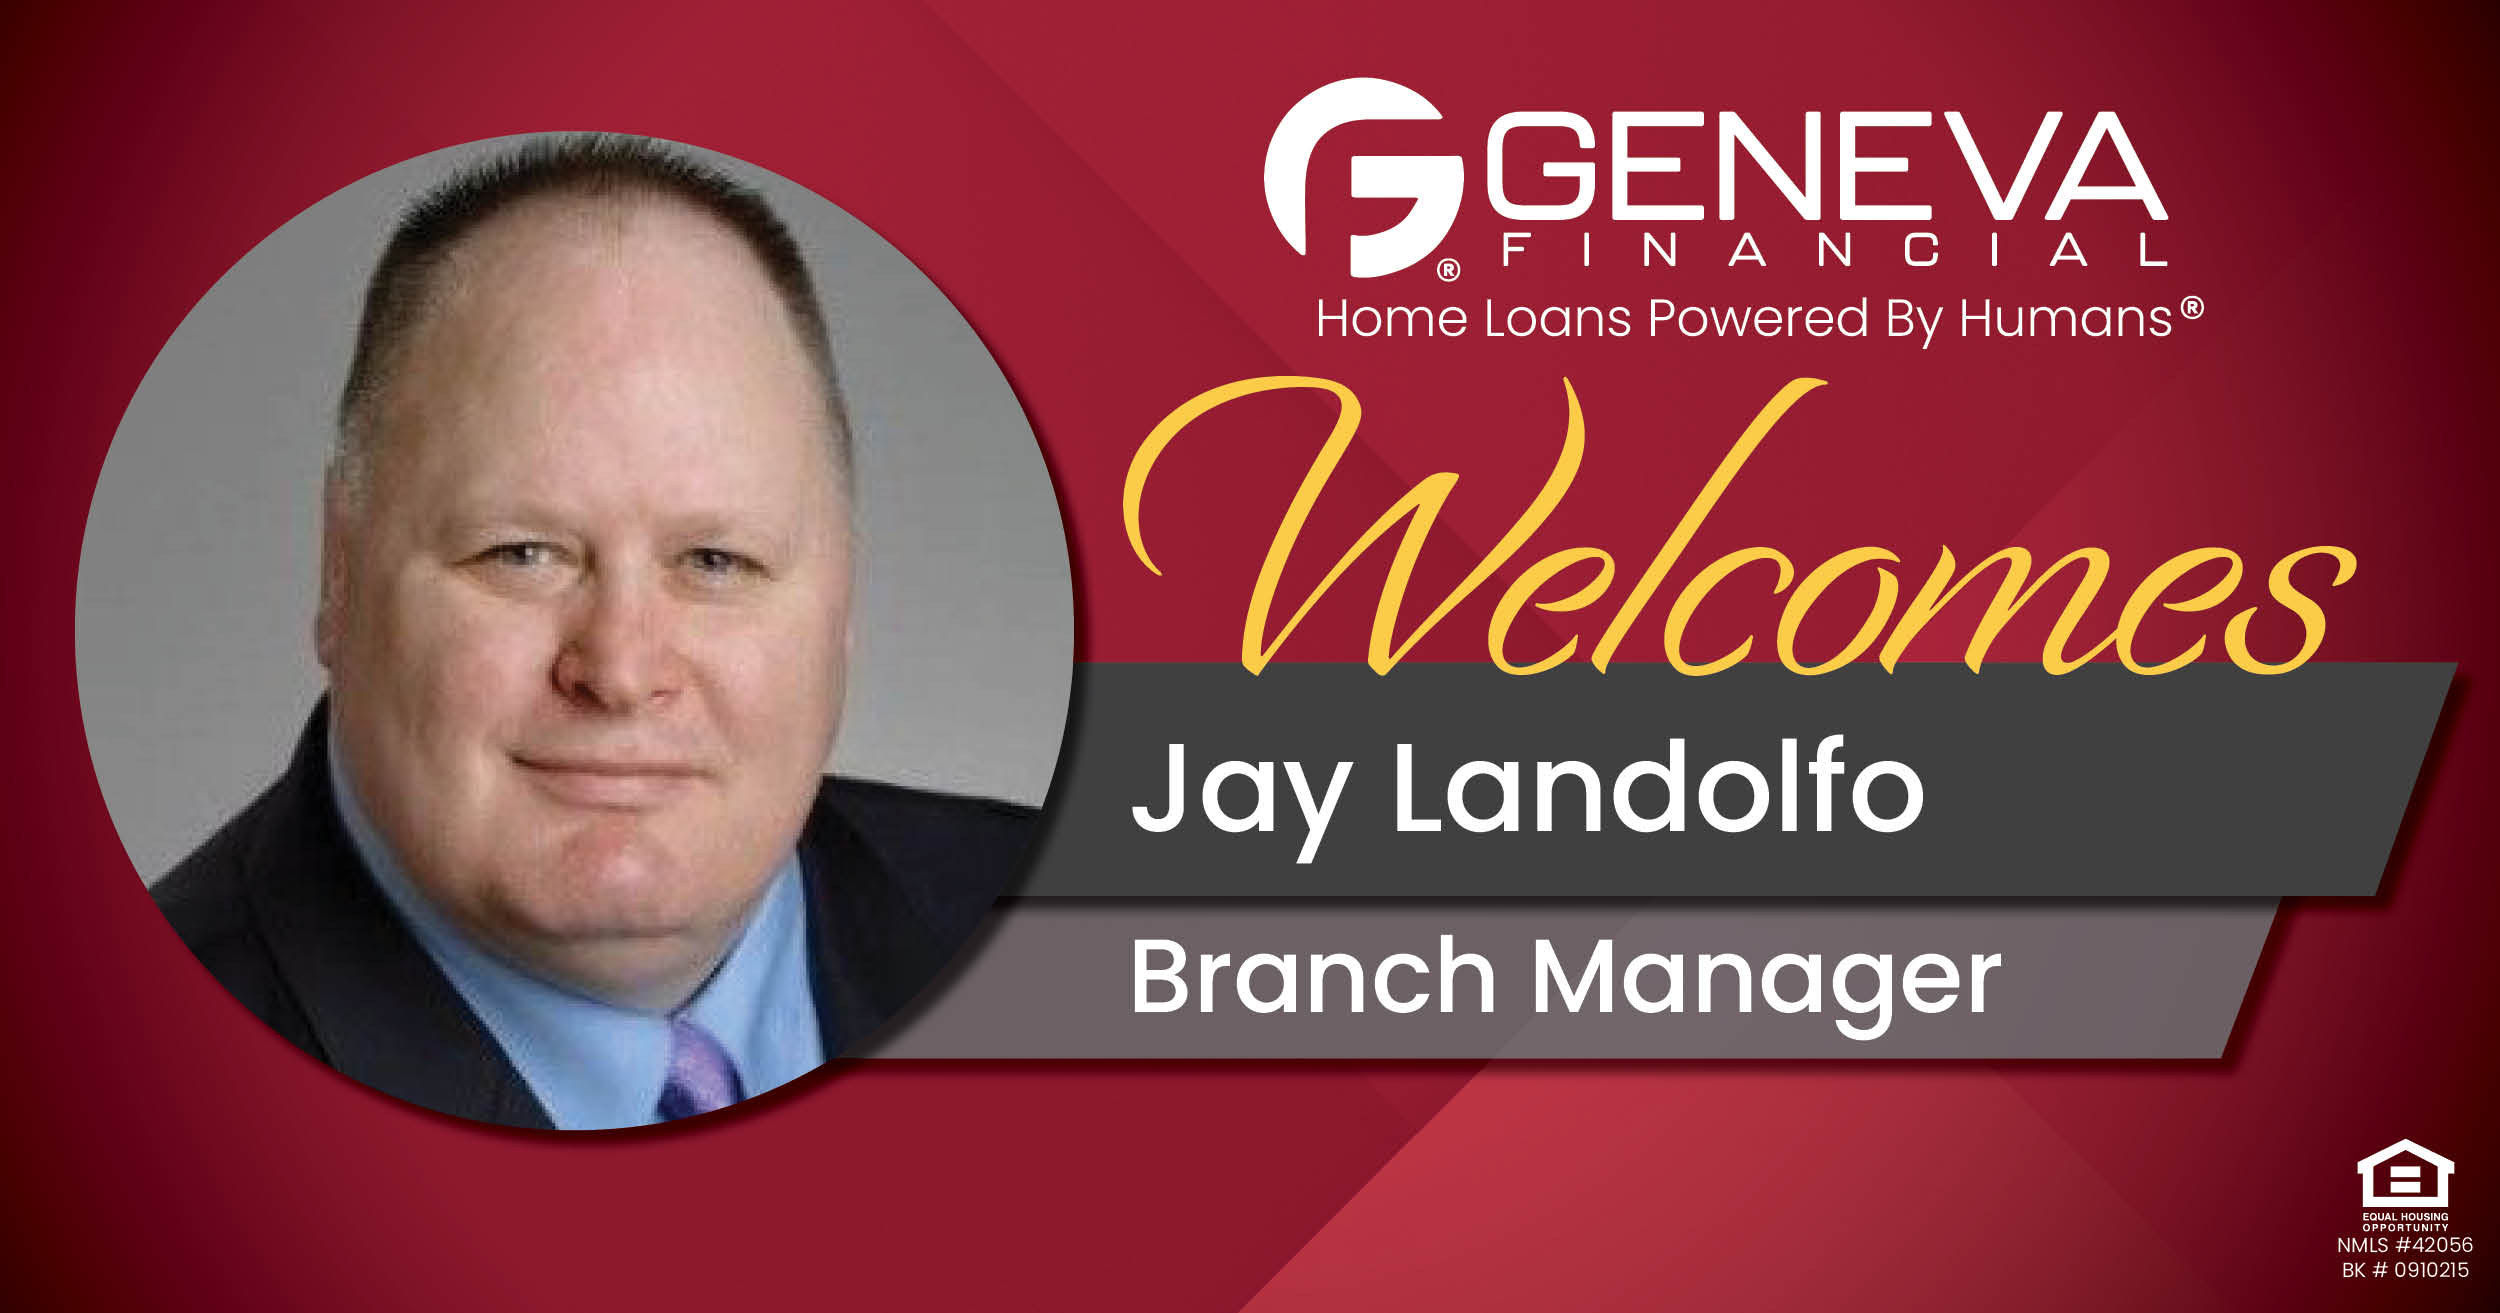 Geneva Financial Welcomes New Branch Manager Jay Landolfo to Westerville, Ohio – Home Loans Powered by Humans®.